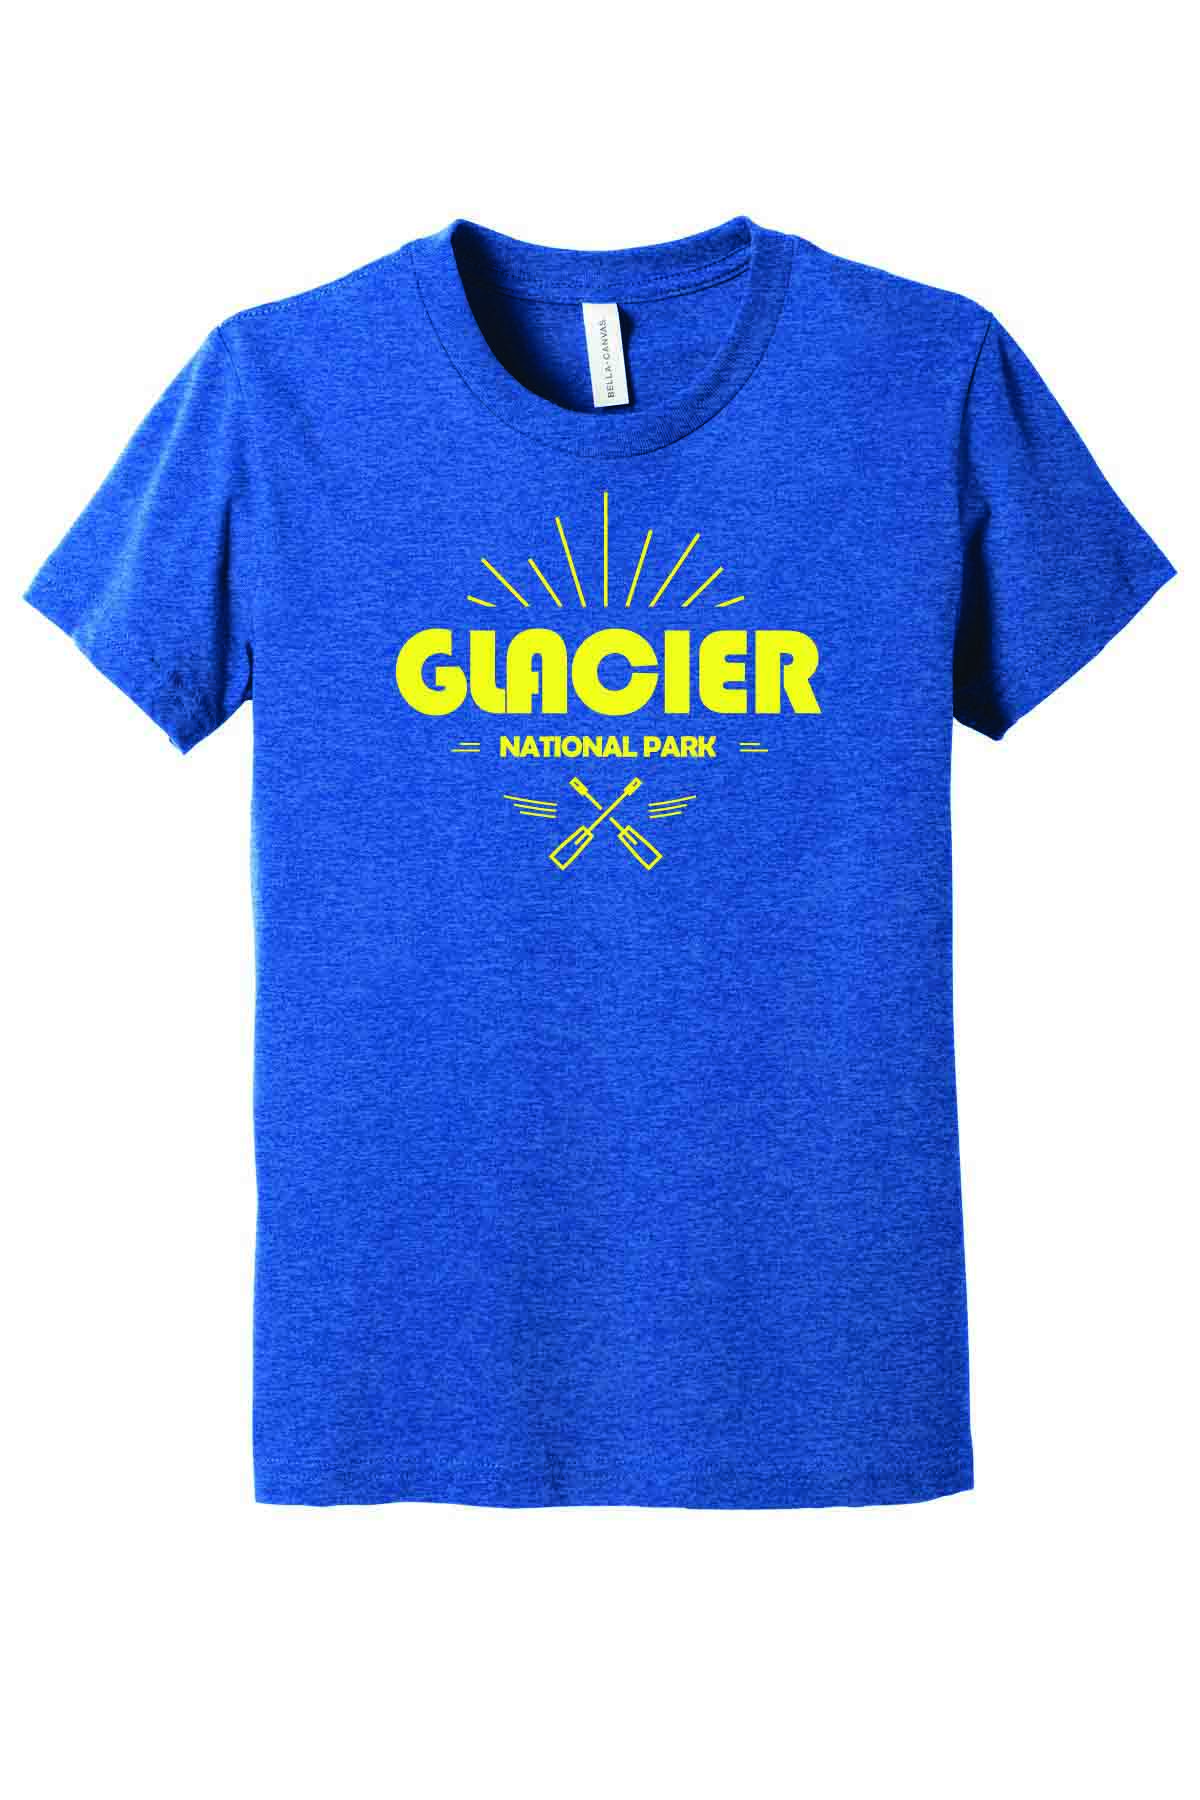 Featured image for “Tourist Tee YOUTH Glacier Paddle (Multiple Colors)”